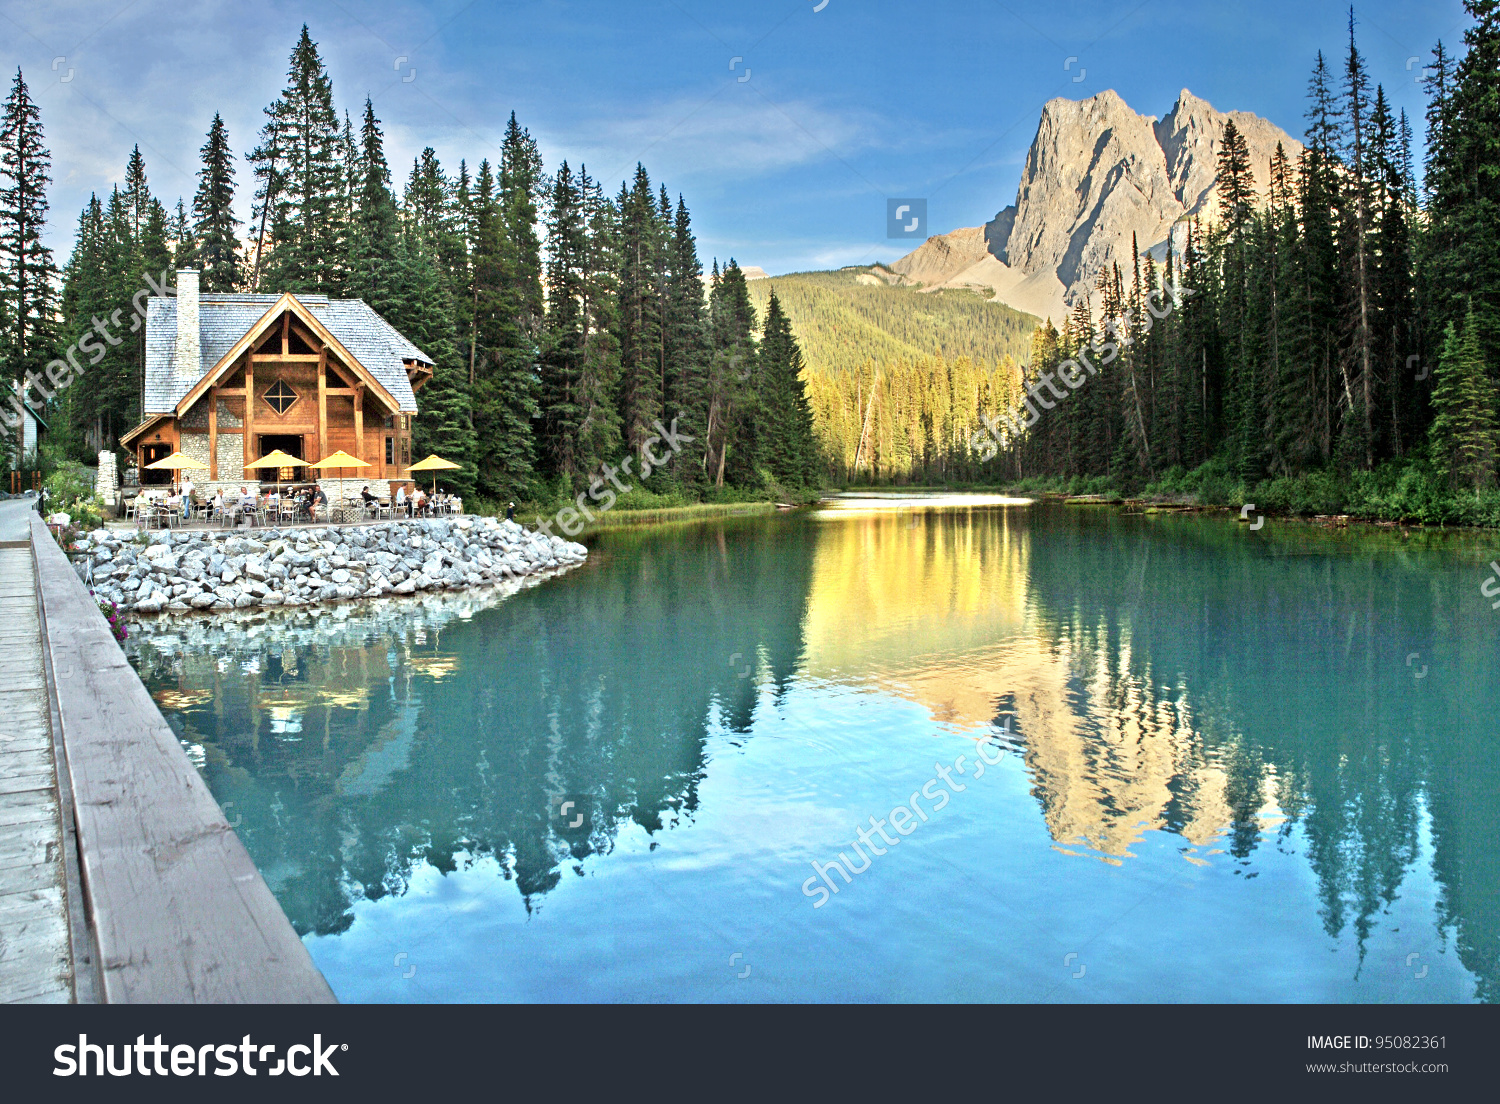 Yoho National Park clipart #2, Download drawings